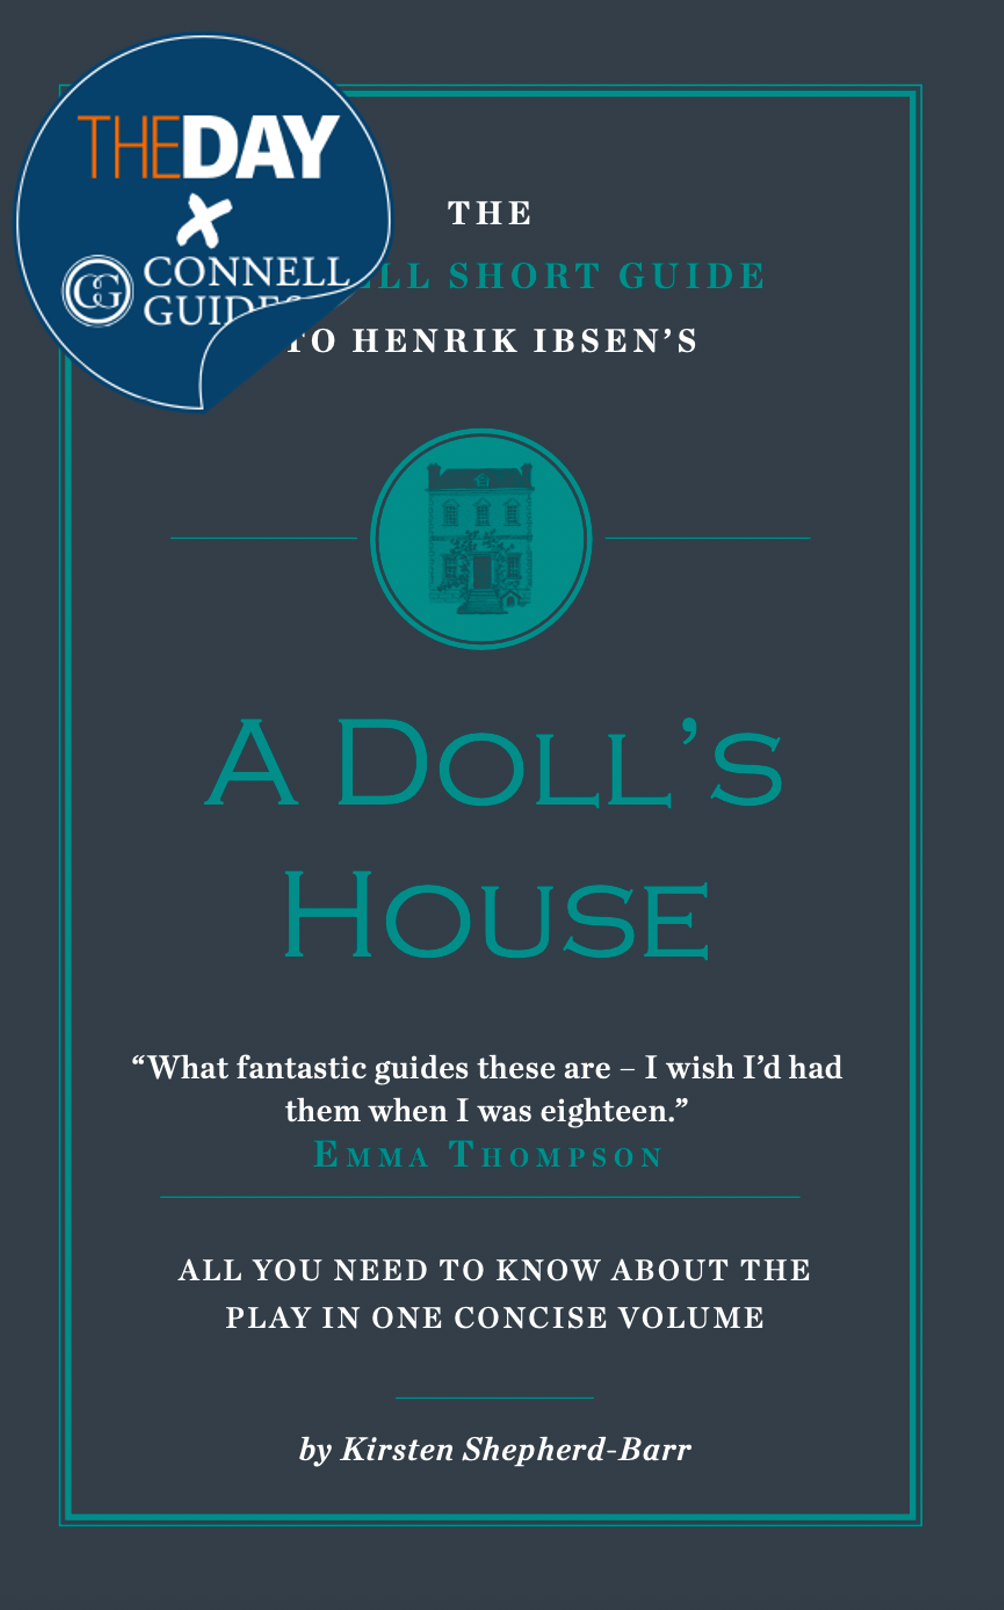 The Day x Connell Guides - The Connell Short Guide to Henrik Ibsen's A Doll's House